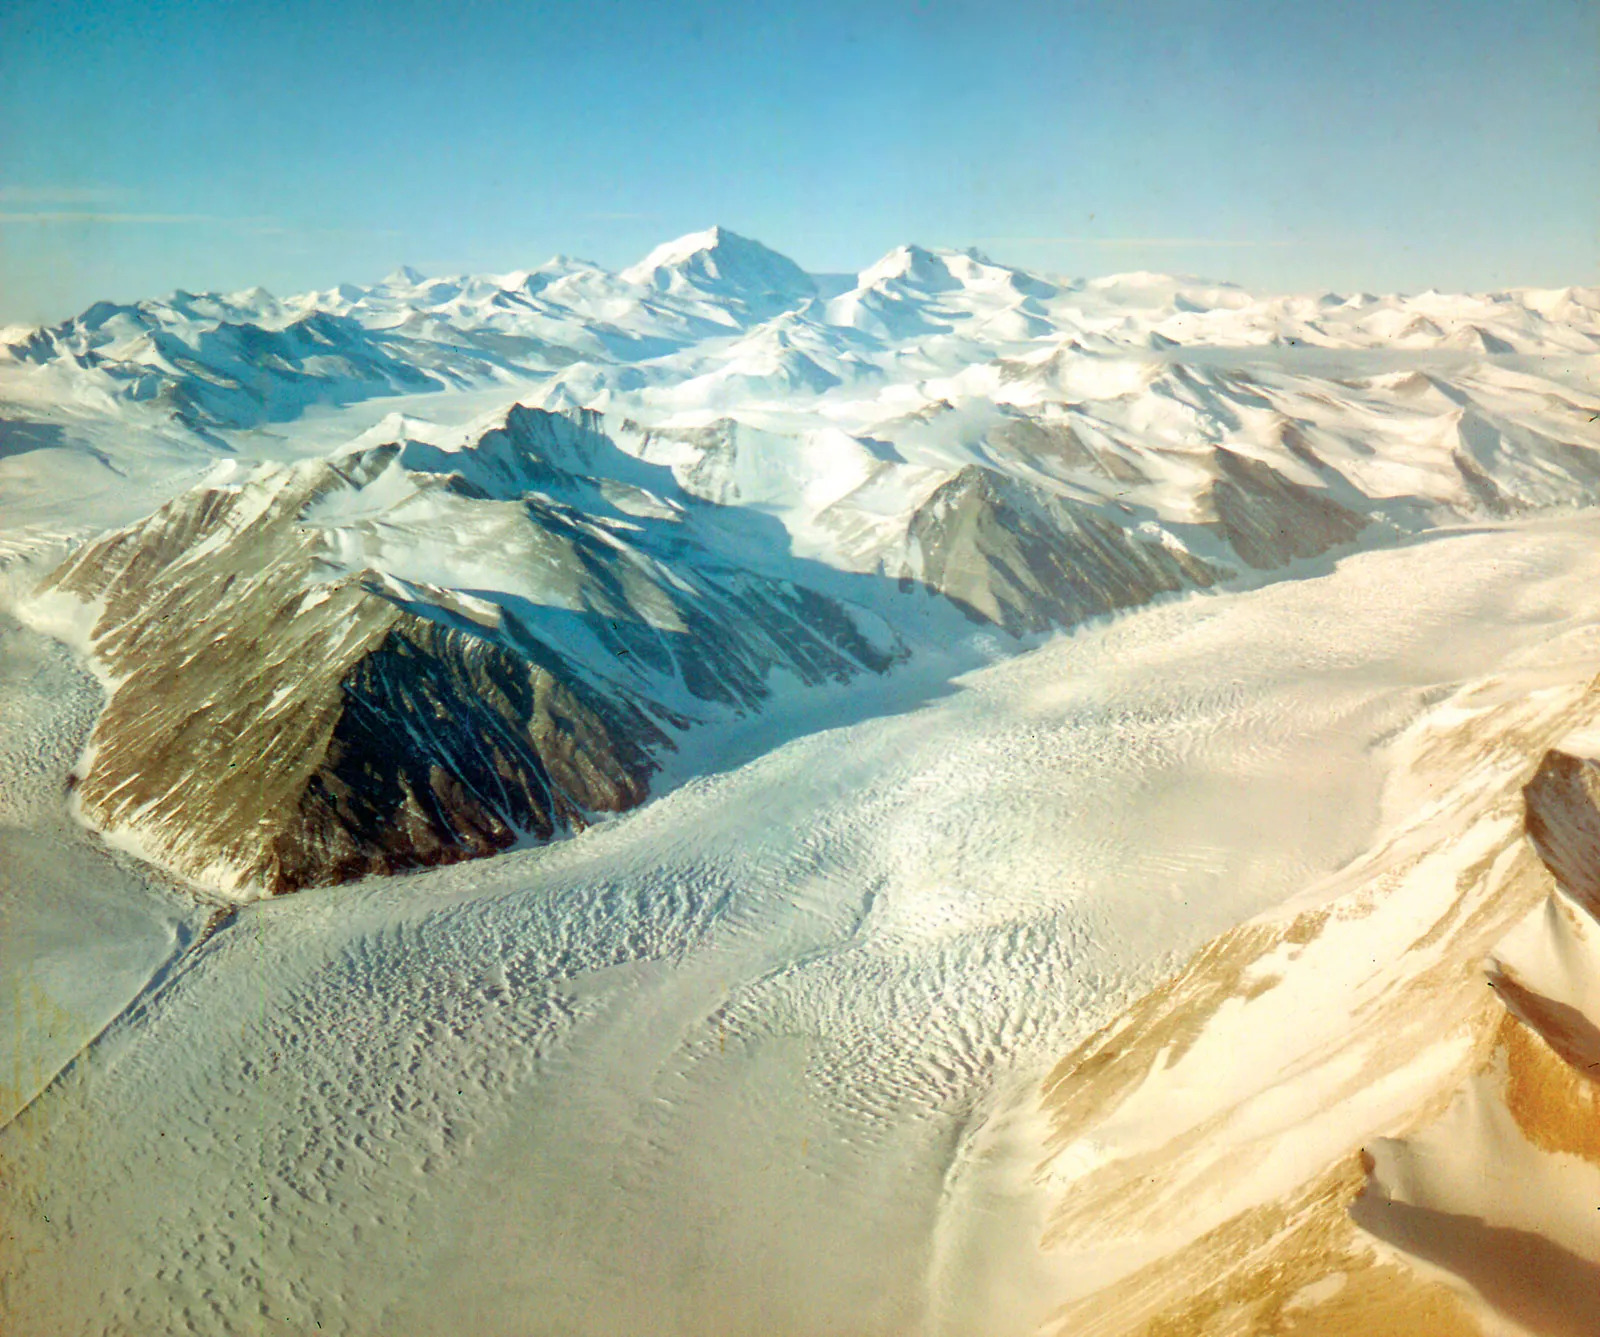 Beardmore Glacier in central Antarctica. The mountainous terrain forms a valley of snow and ice. Most of the mountaintops are covered in snow, but some are exposed and rocky terrain can be seen.